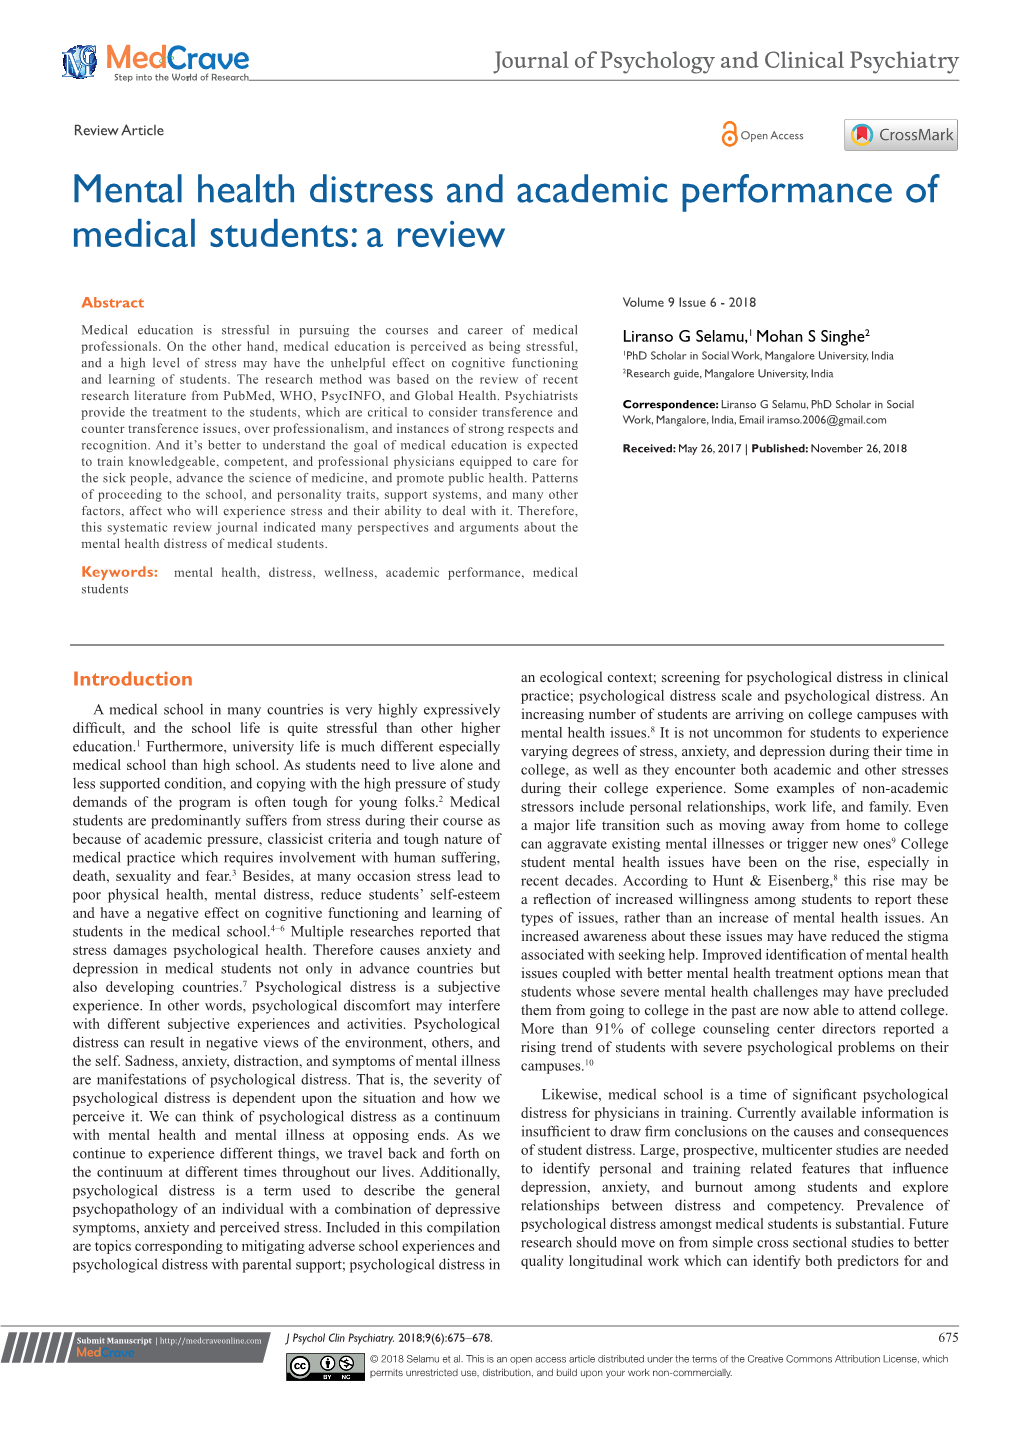 Mental Health Distress and Academic Performance of Medical Students: a Review